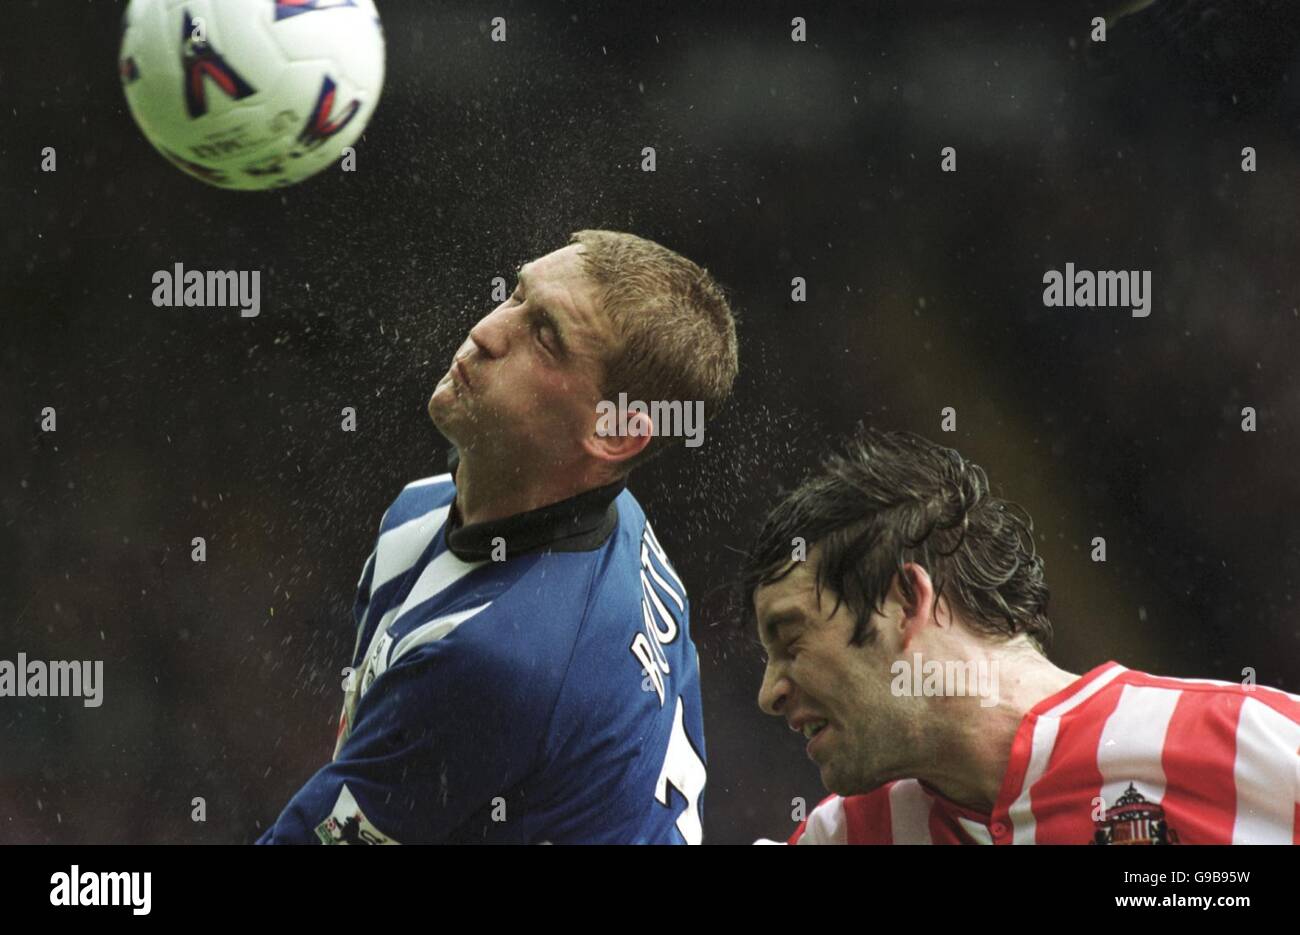 Soccer - FA Carling Premiership - Sheffield Wednesday v Sunderland. Sheffield Wednesday's Andy Booth battles in the rain with Sunderland's Paul Butler Stock Photo